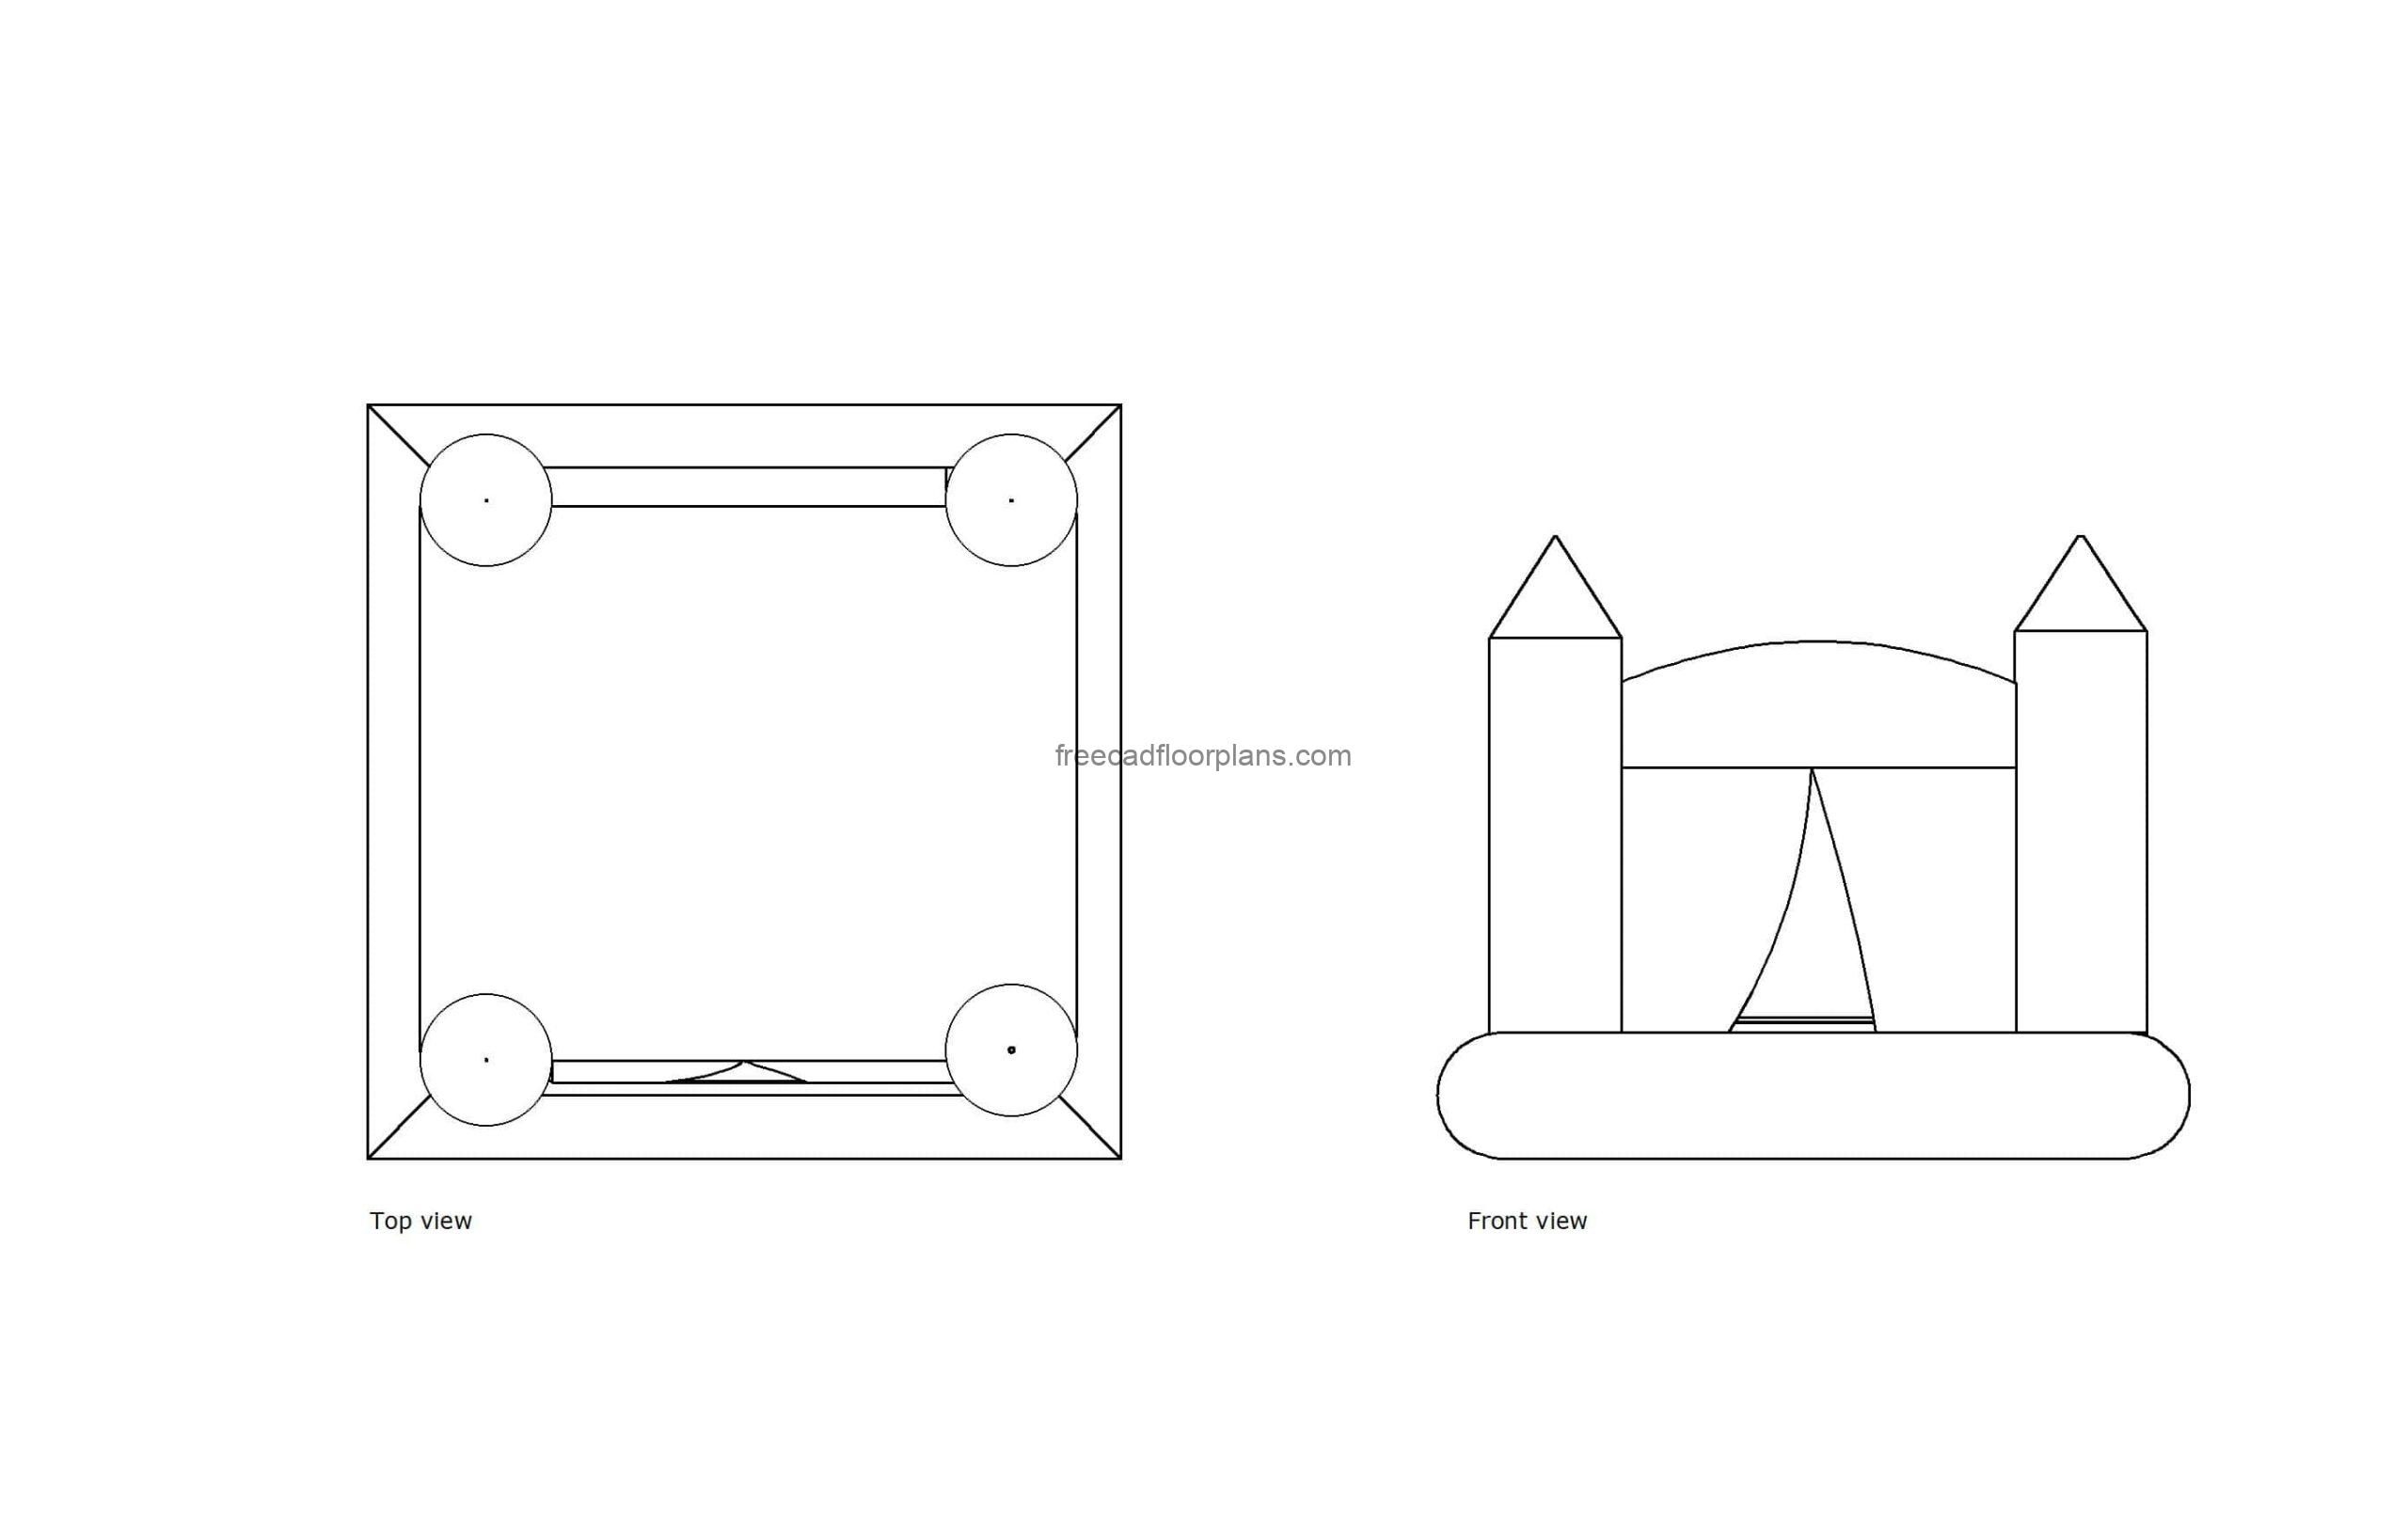 bounce house autocad drawing, plan and elevation 2d views, dwg file free for download